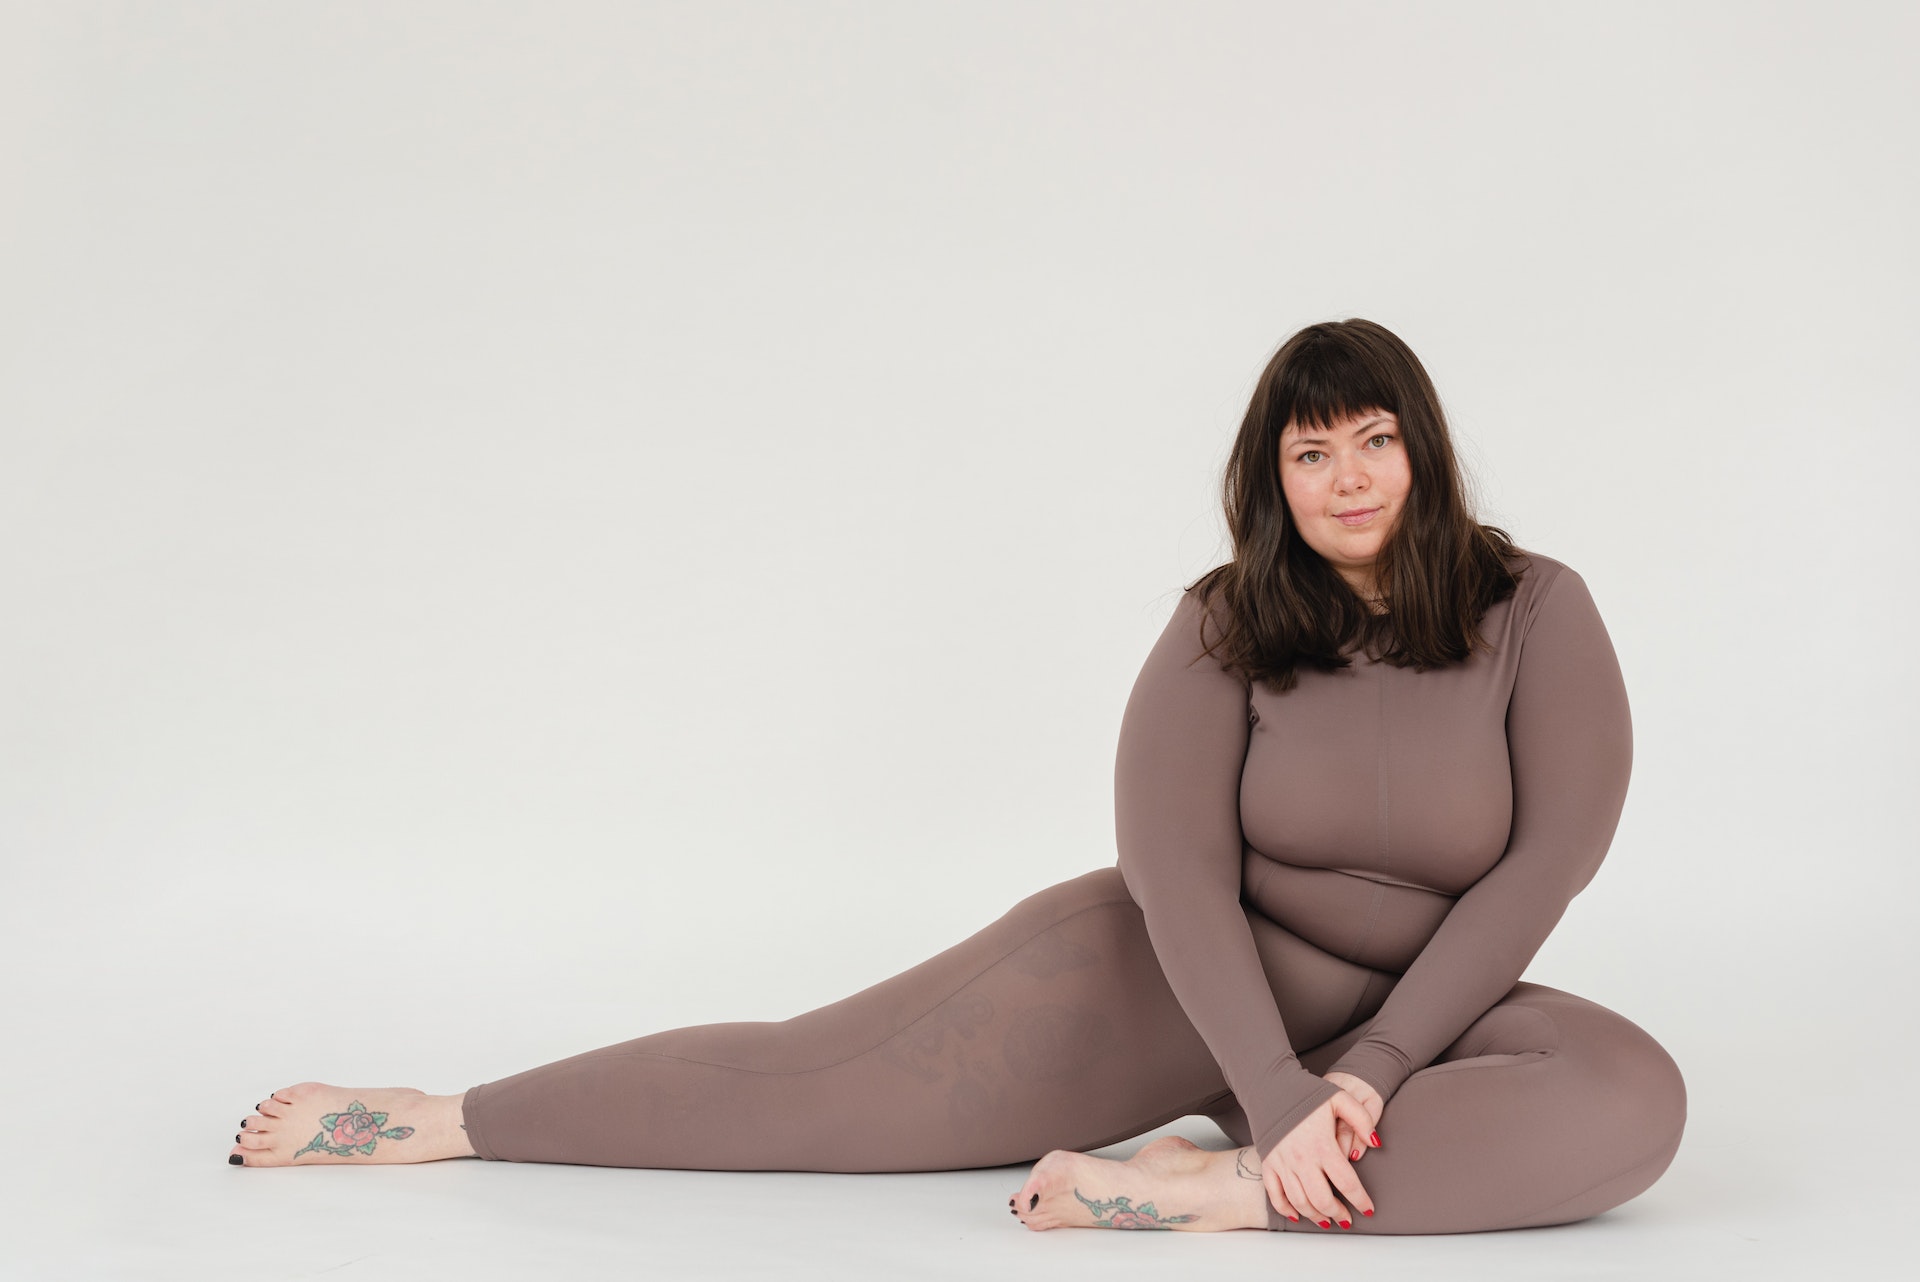 Overweight woman in activewear sitting in studio during training